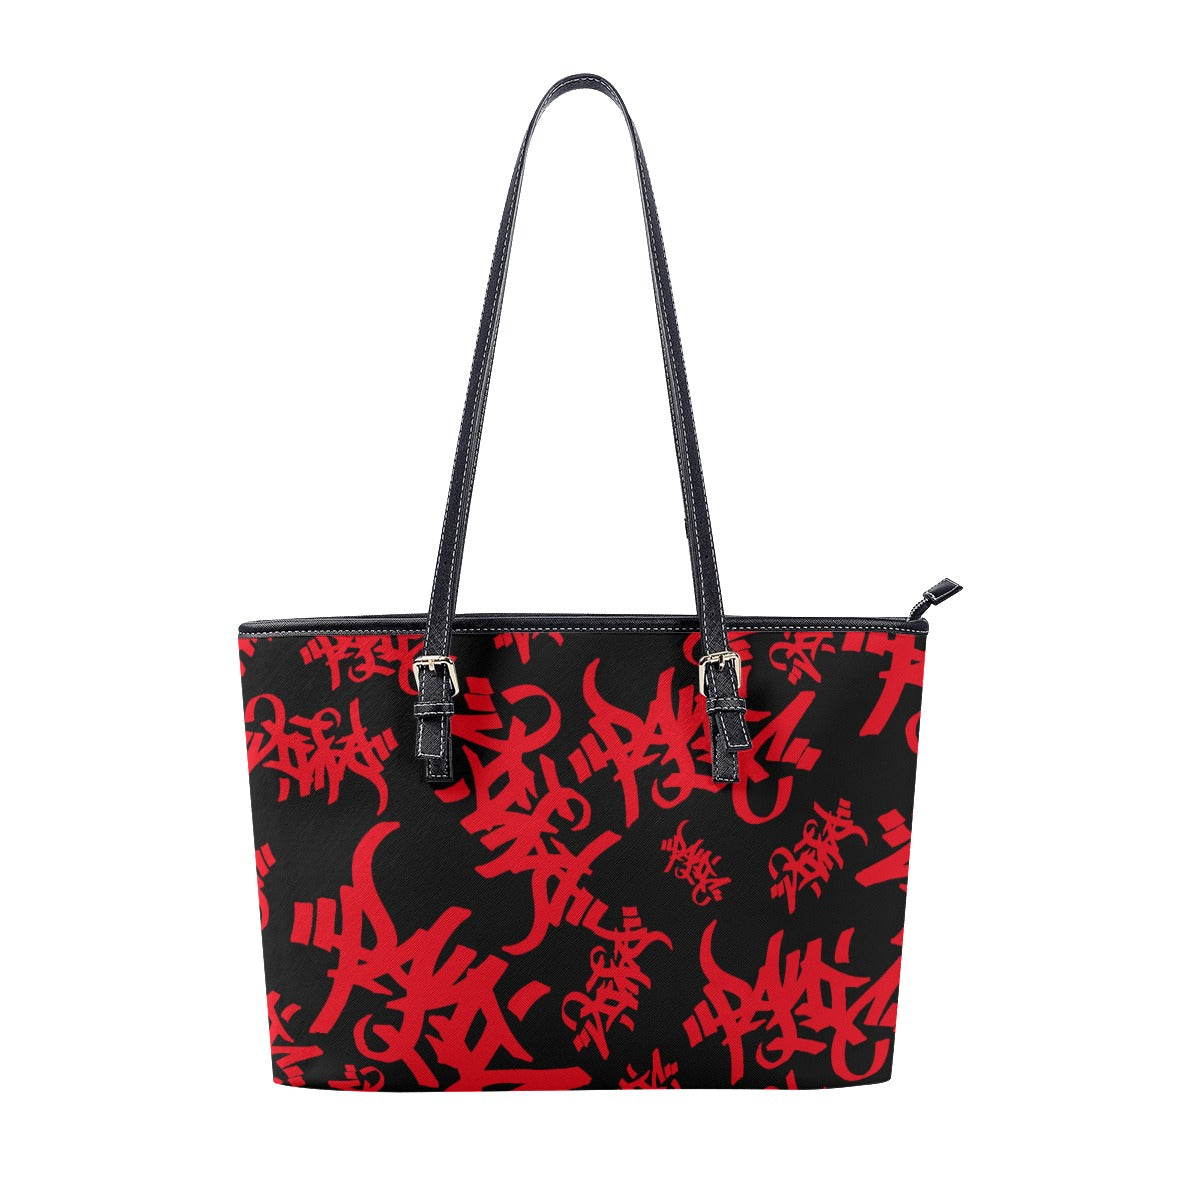 THE TAG FAUX LEATHER TOTE BAG - BLACK/RED – Panic 39